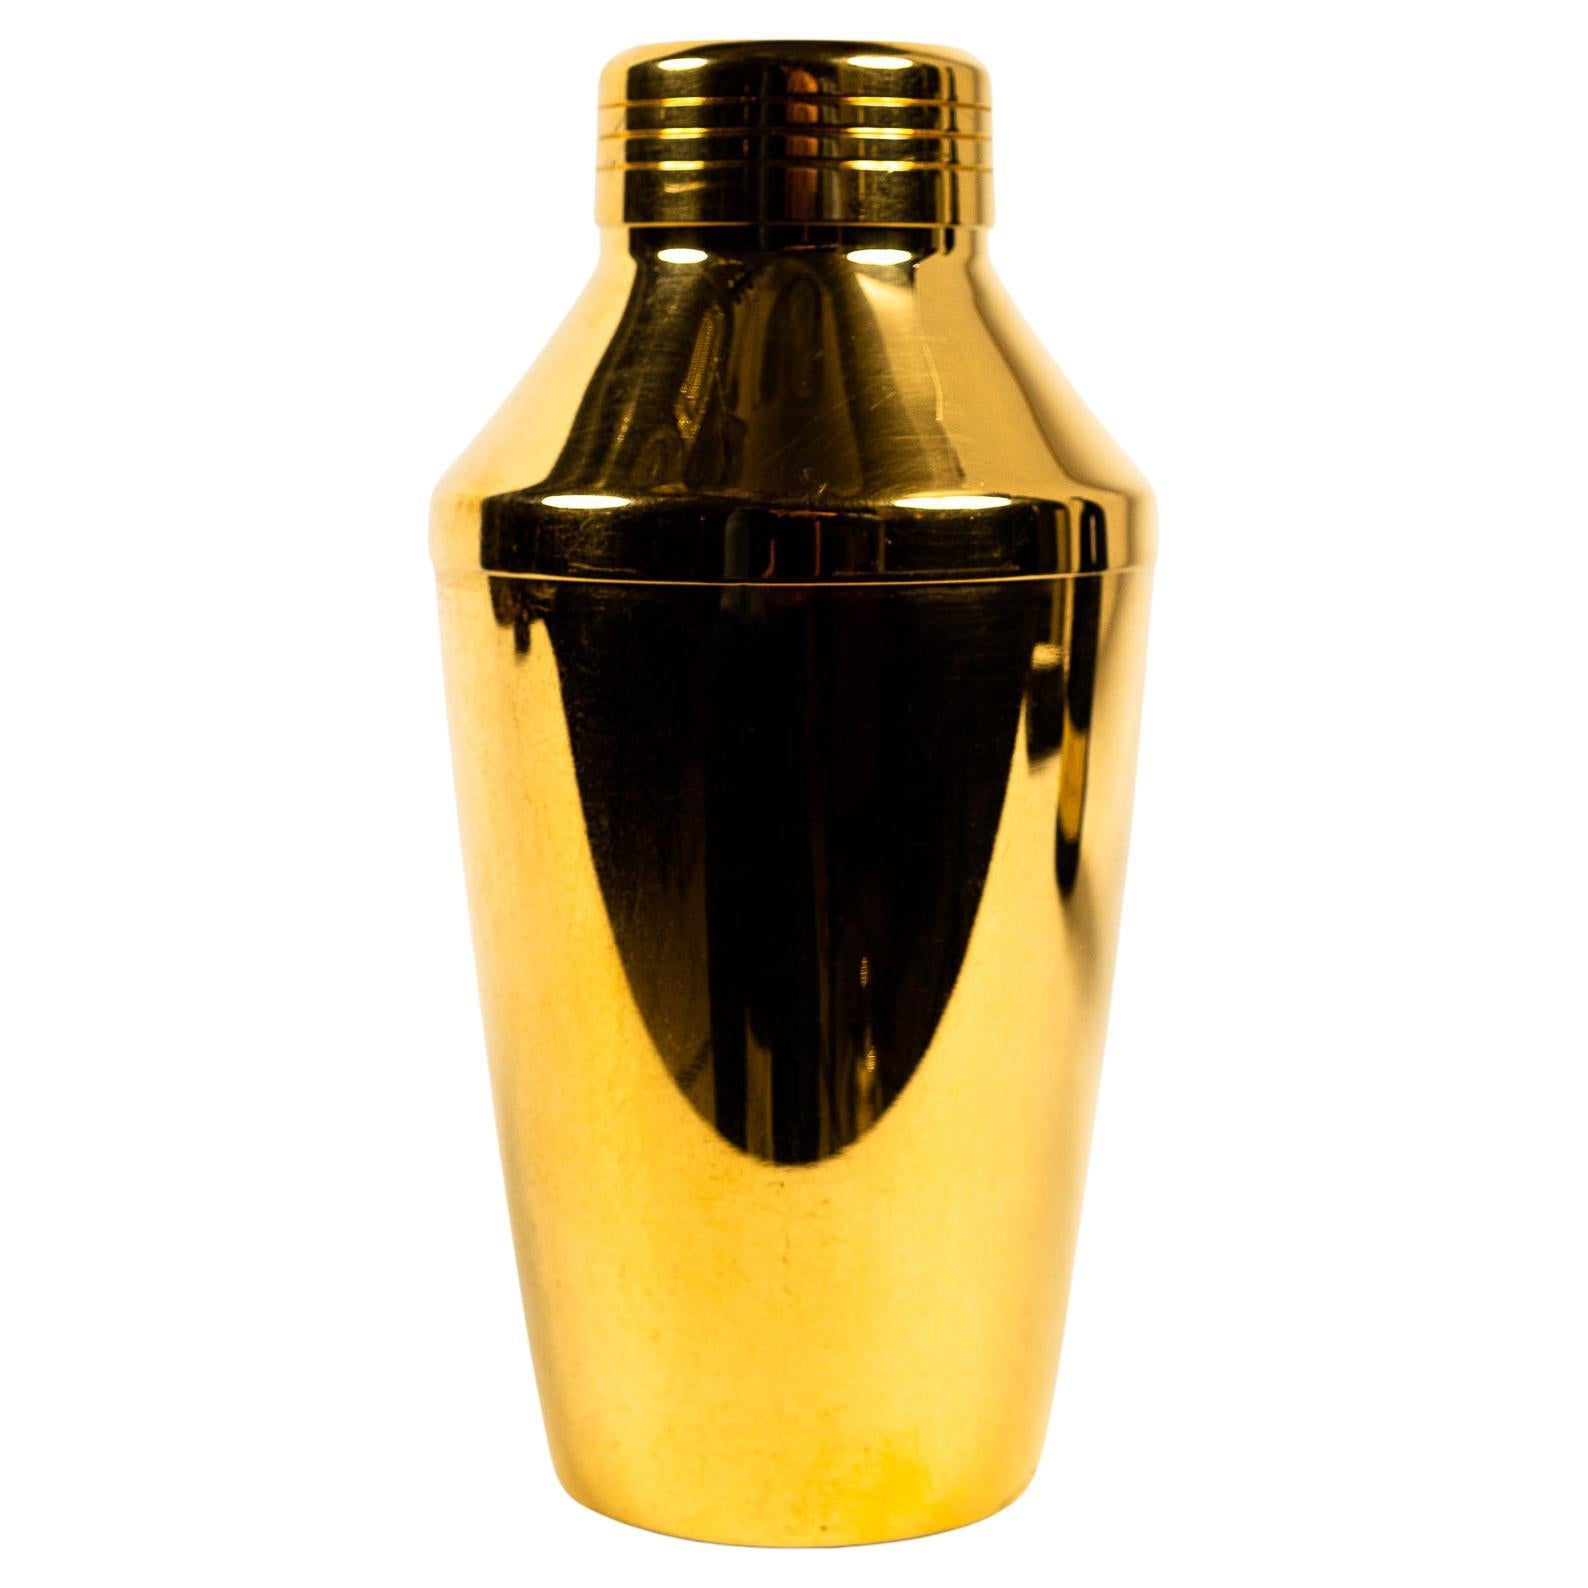 Gilted Art Deco Cocktail Shaker around 1930s